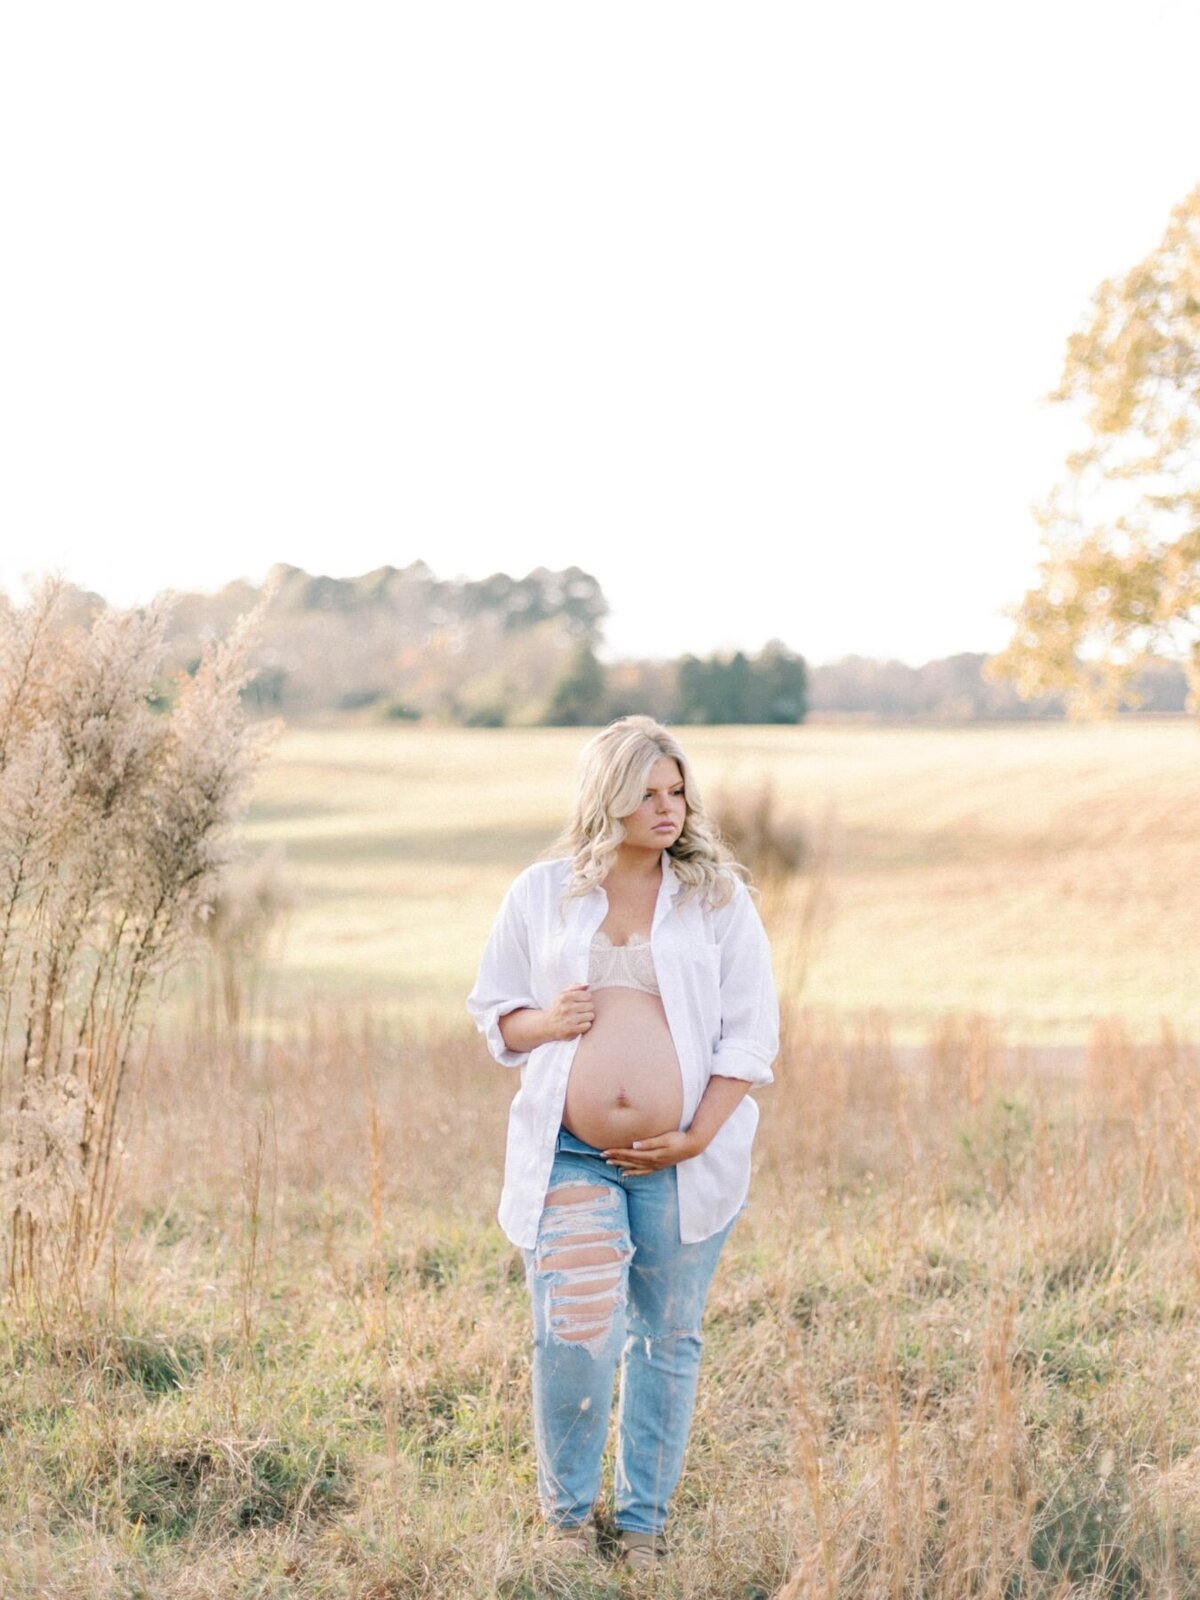 Woman stands in grass field holding bare pregnant belly.